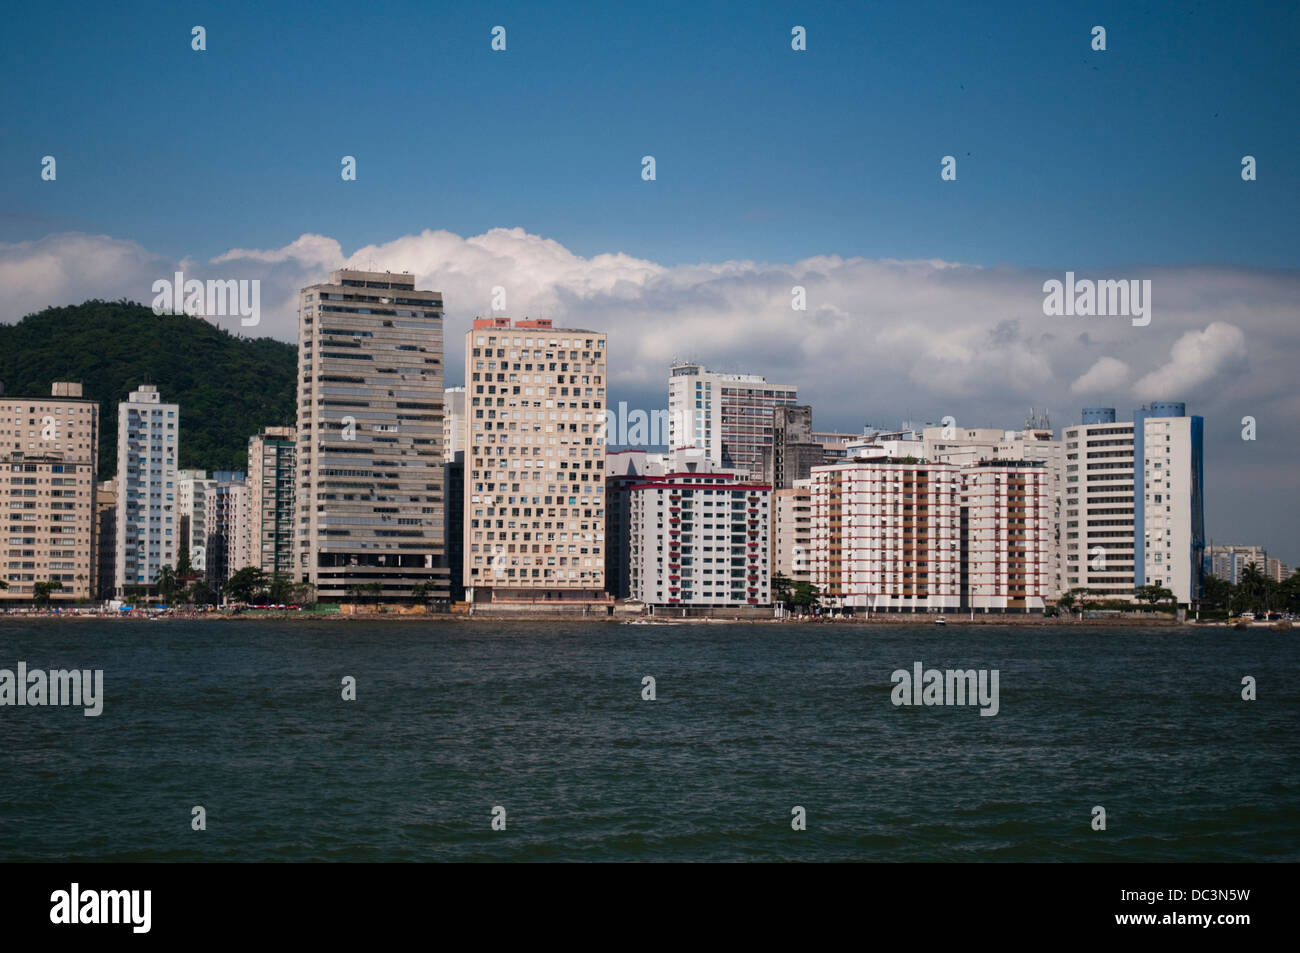 buildings at shore line in the city of Sao Vicente, shore of Sao Paulo state, Brazil Stock Photo